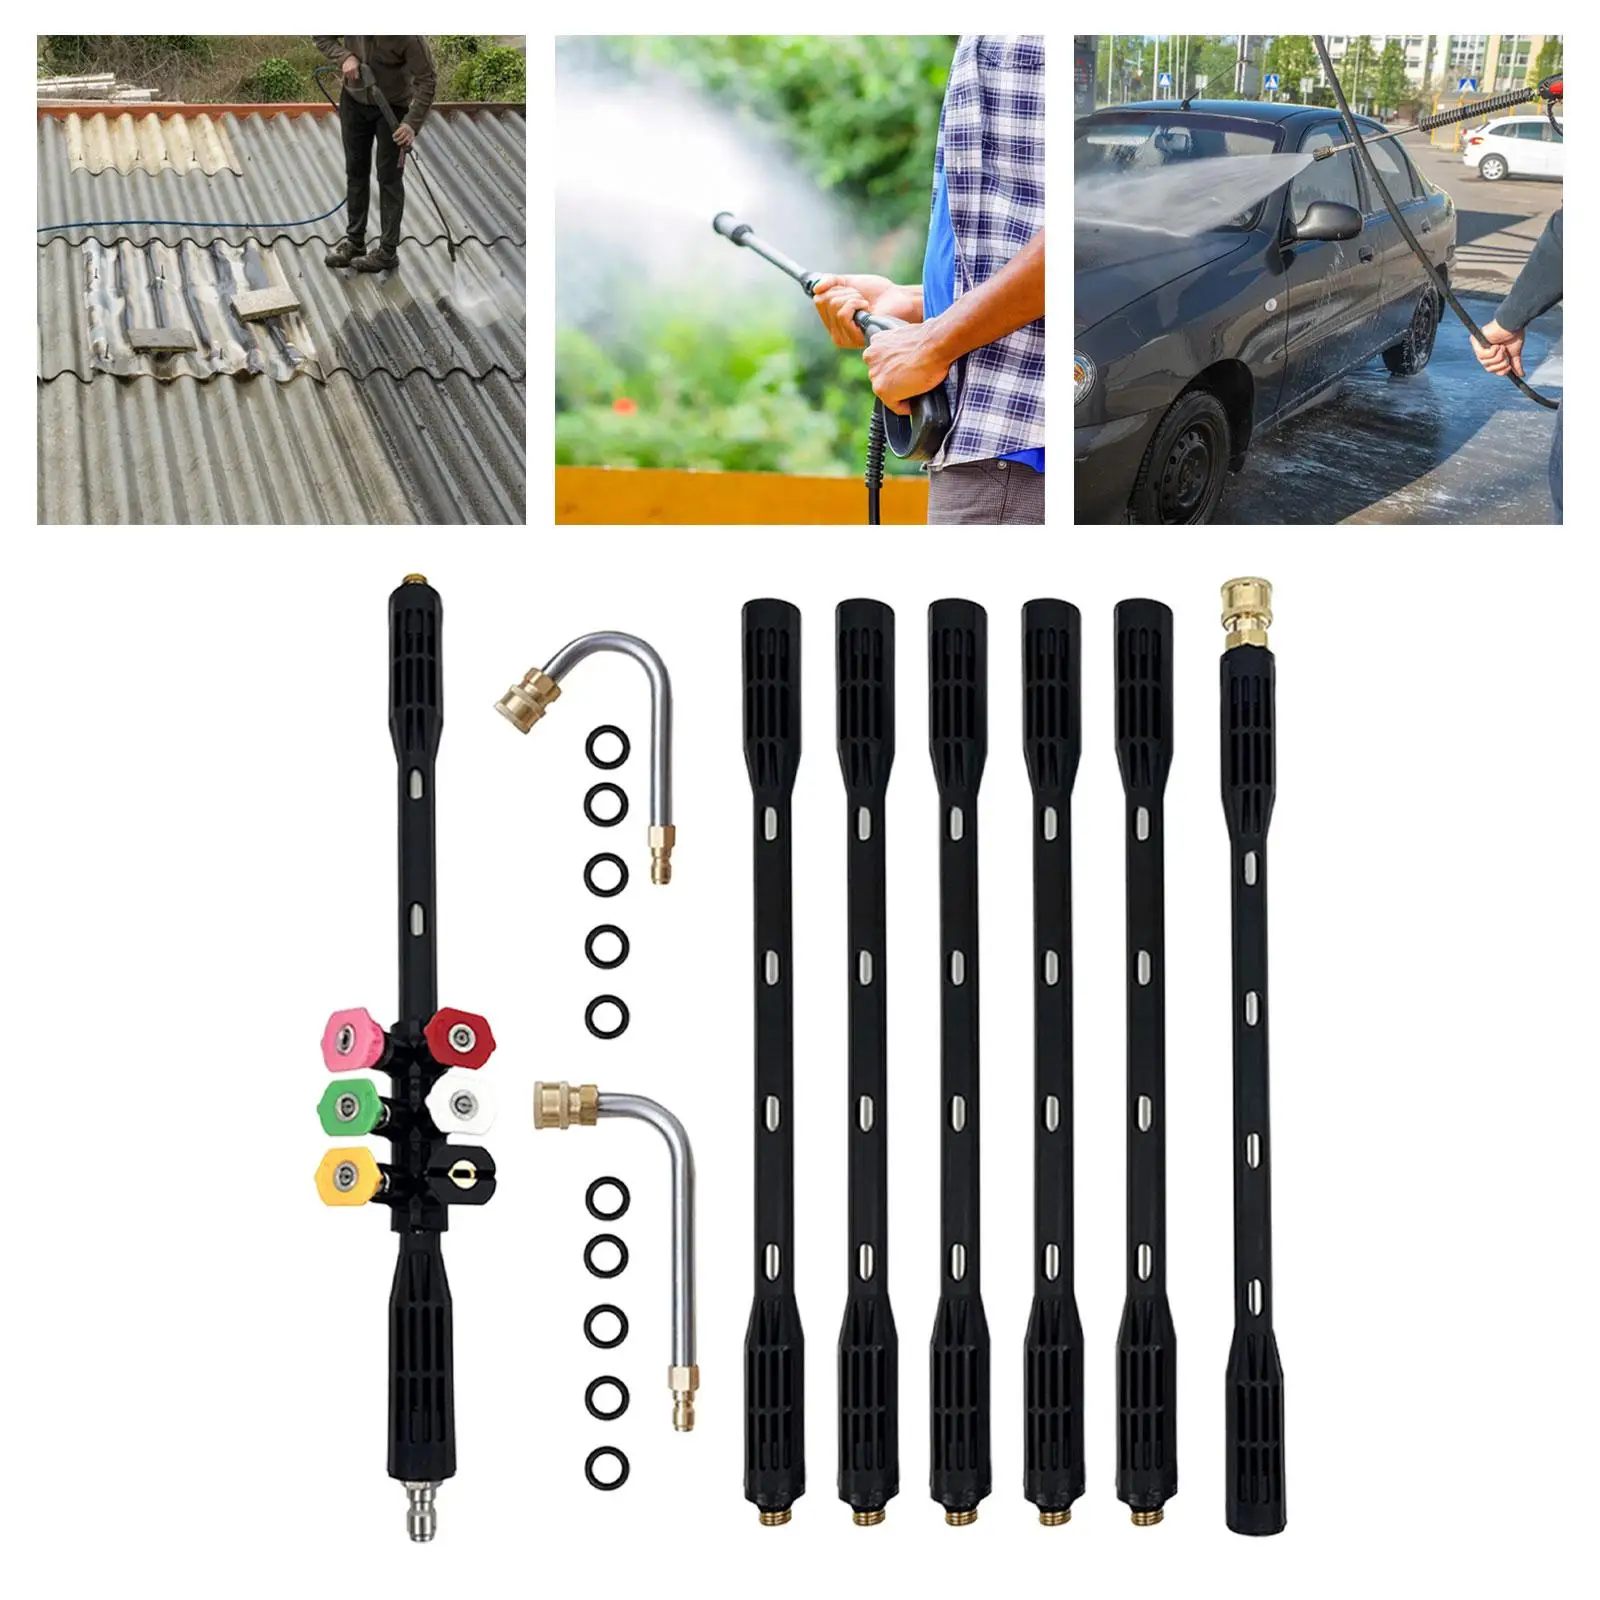 9 Pieces Power Washer Gutter Cleaning Tools Replacement Lance Pressure Washer Extension Rod for Water Broom Watering Flowers Car